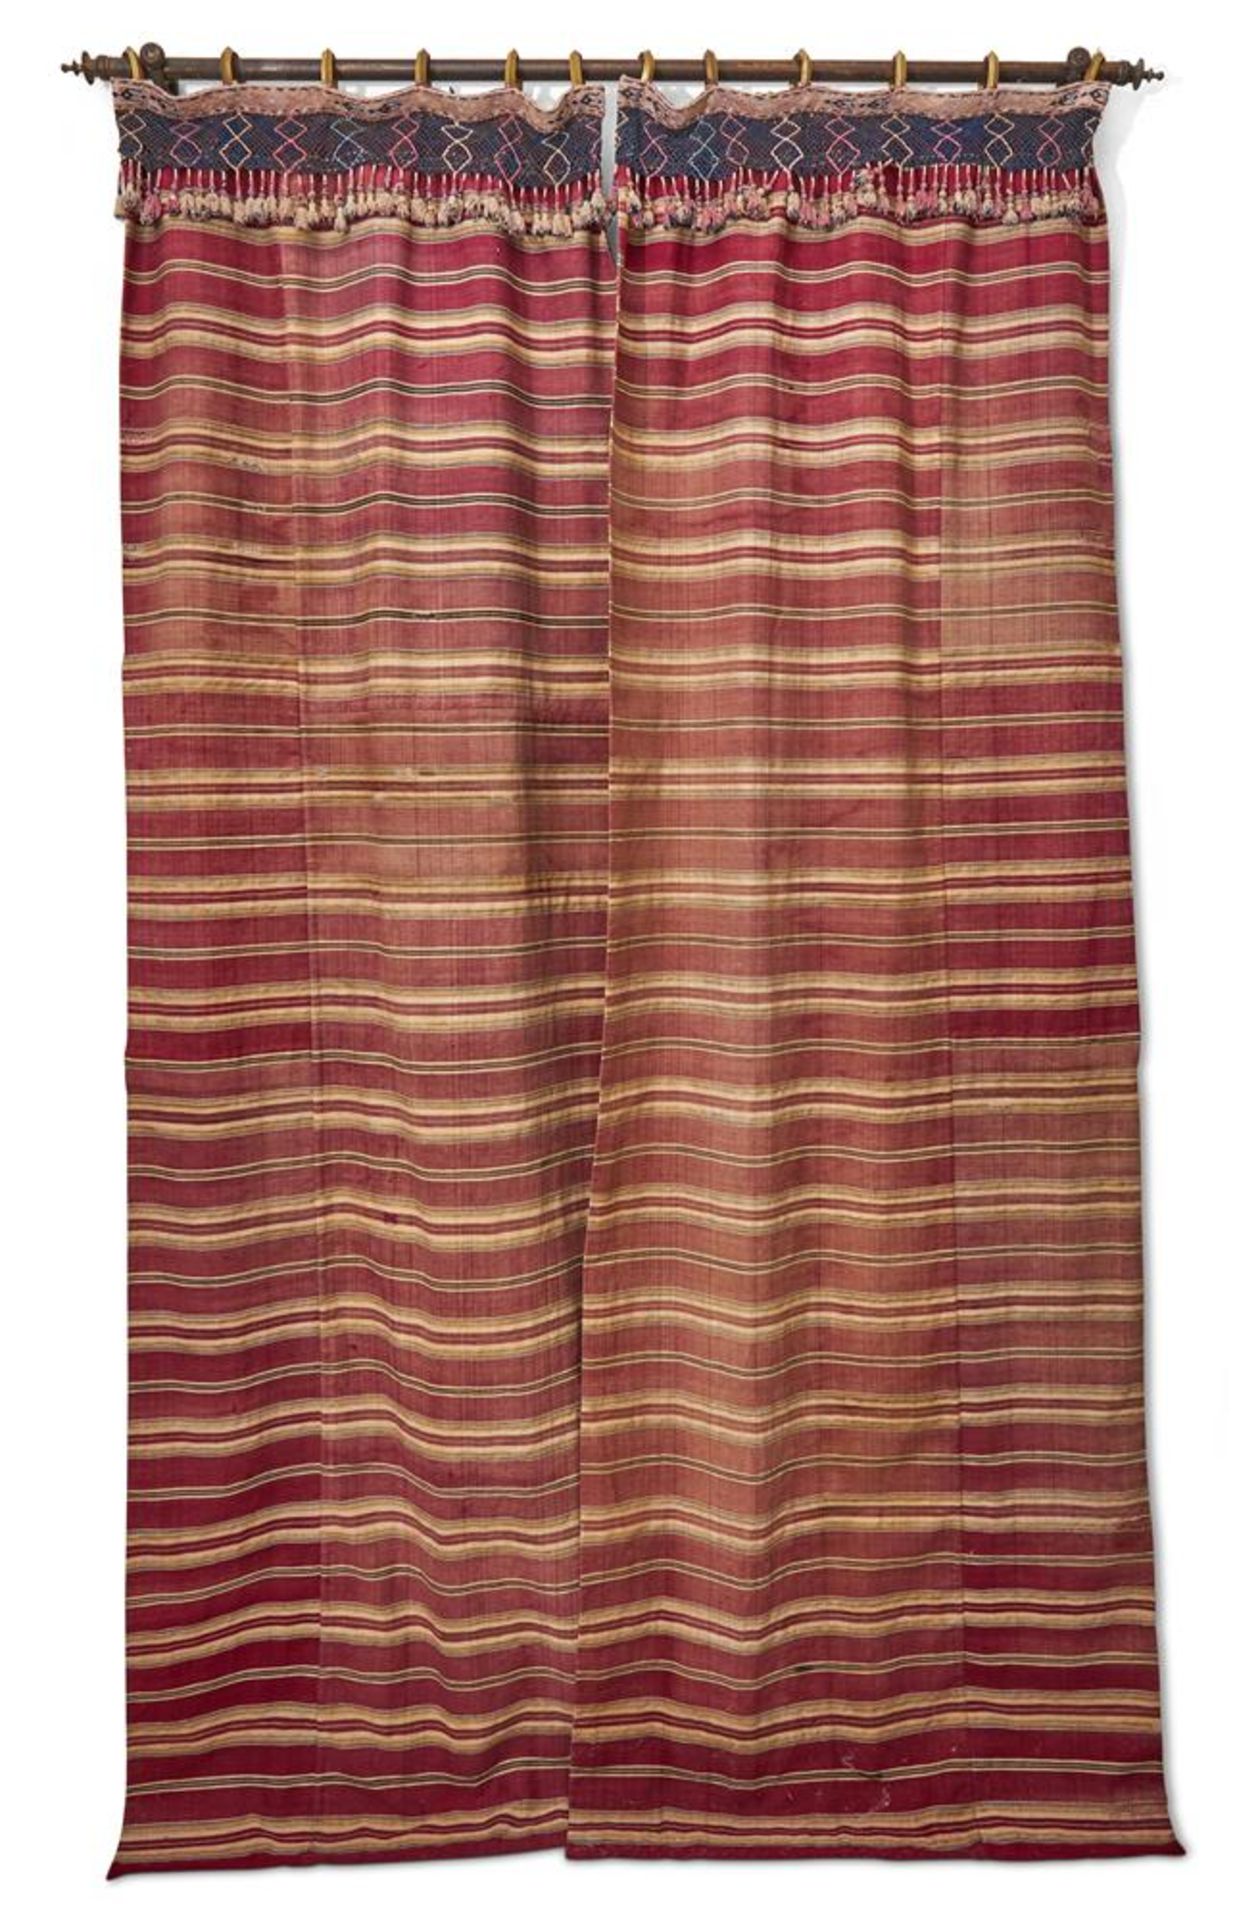 TWO PAIRS OF COTTON AND METALLIC THREAD WOVEN STRIPE CURTAINS, SYRIAN, 19TH CENTURY - Image 4 of 5